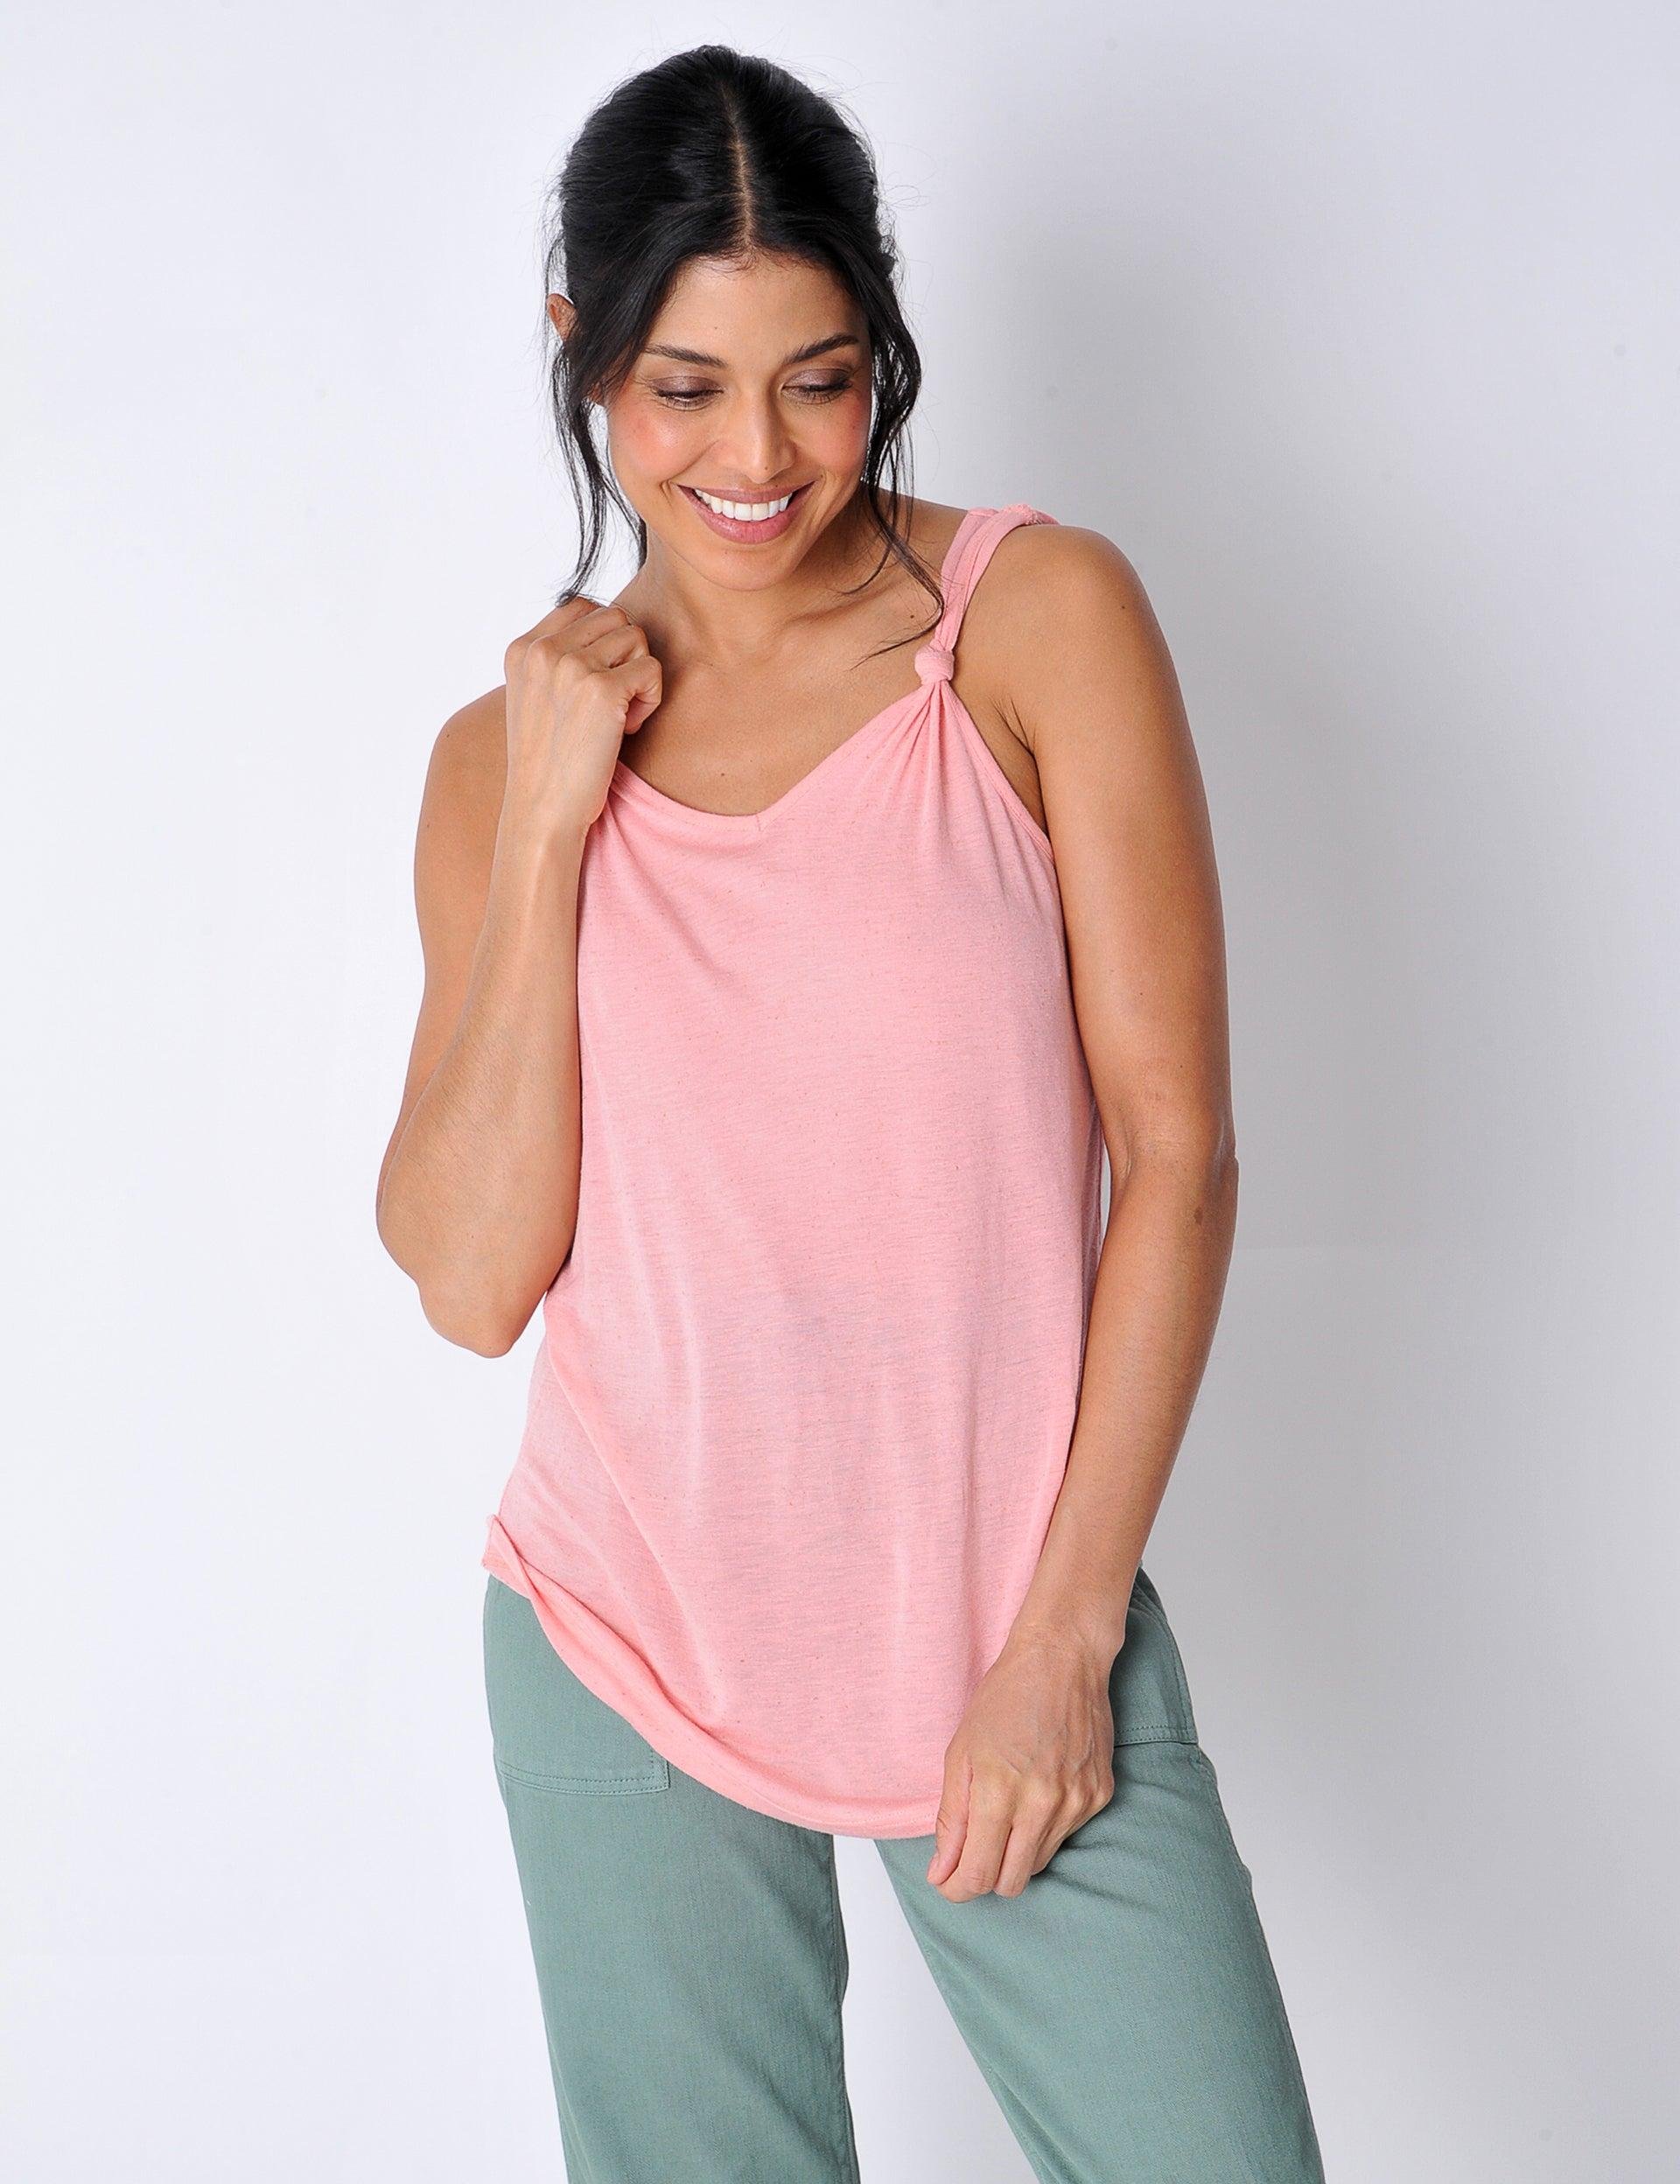 Rame Top in Pink by BURGS